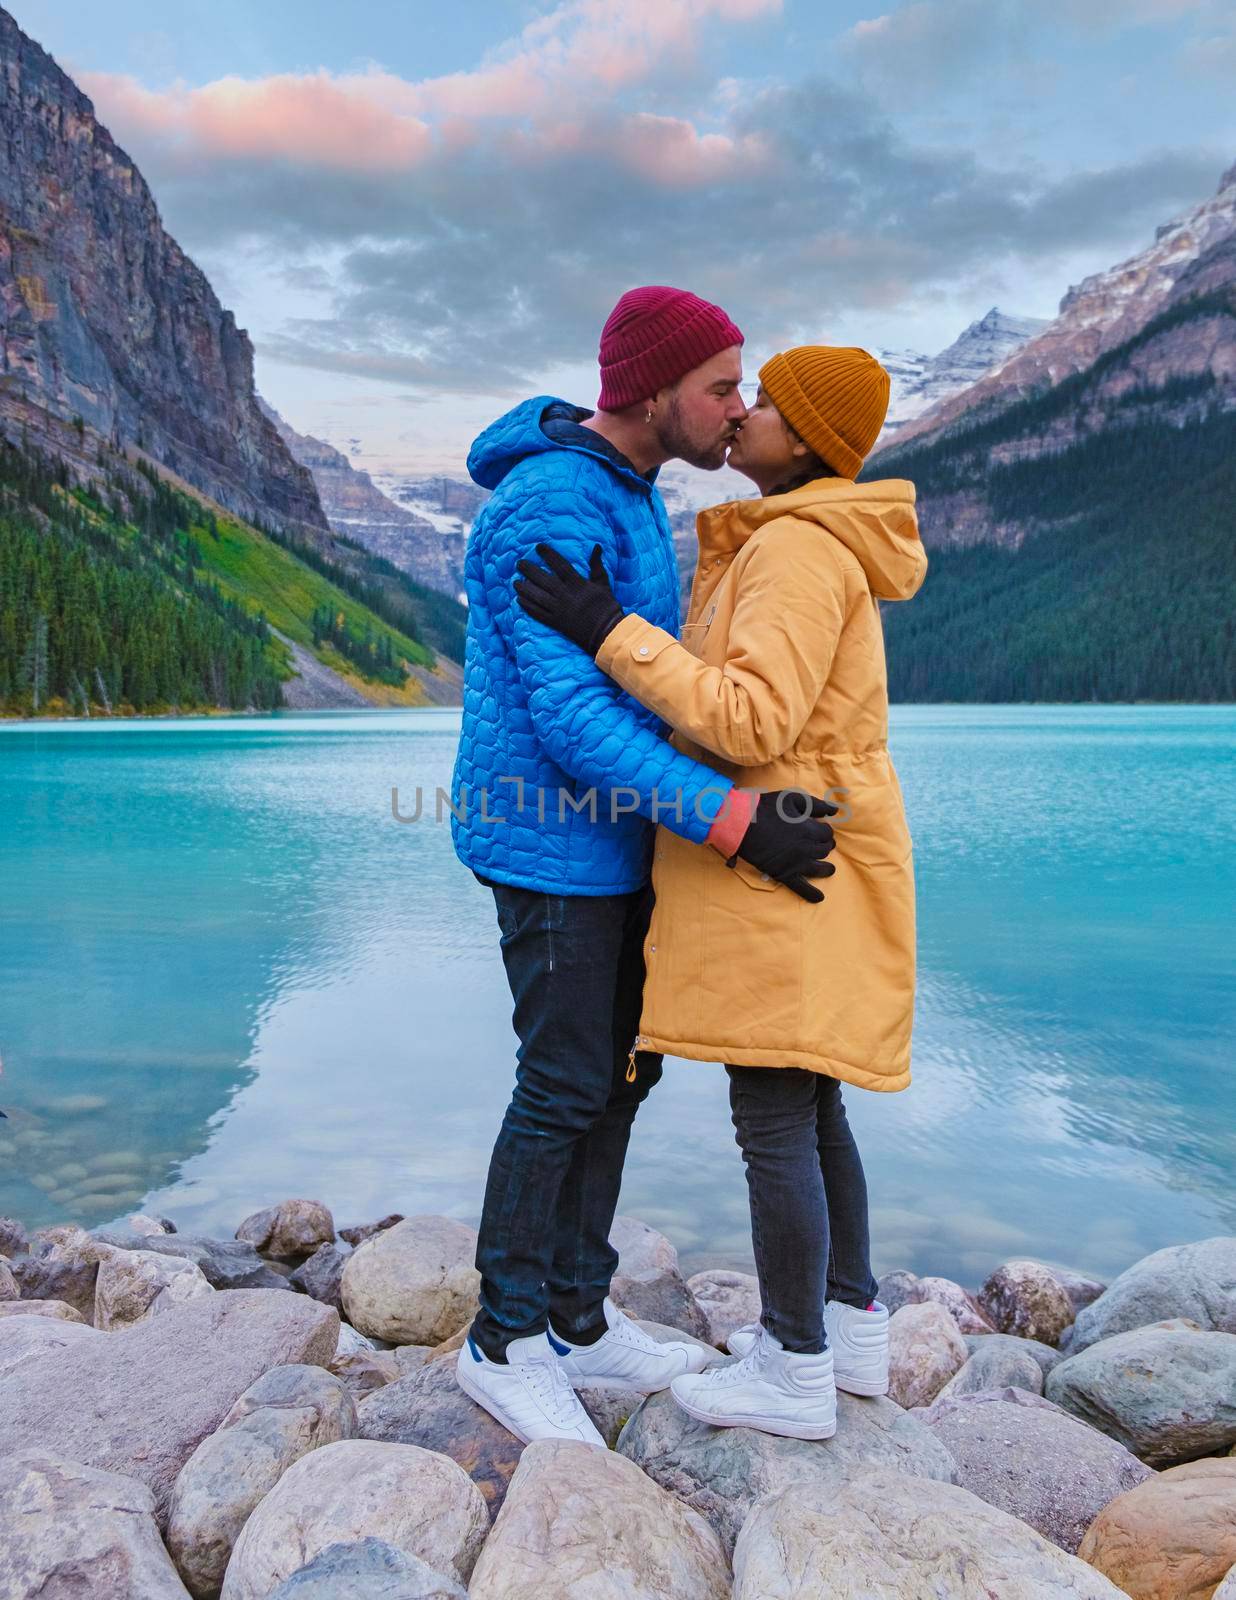 Lake Louise Canadian Rockies Banff national park, of iconic Lake Louise in Banff National Park in the Rocky Mountains of Alberta Canada. Romantic lovely couple men and women by the lake